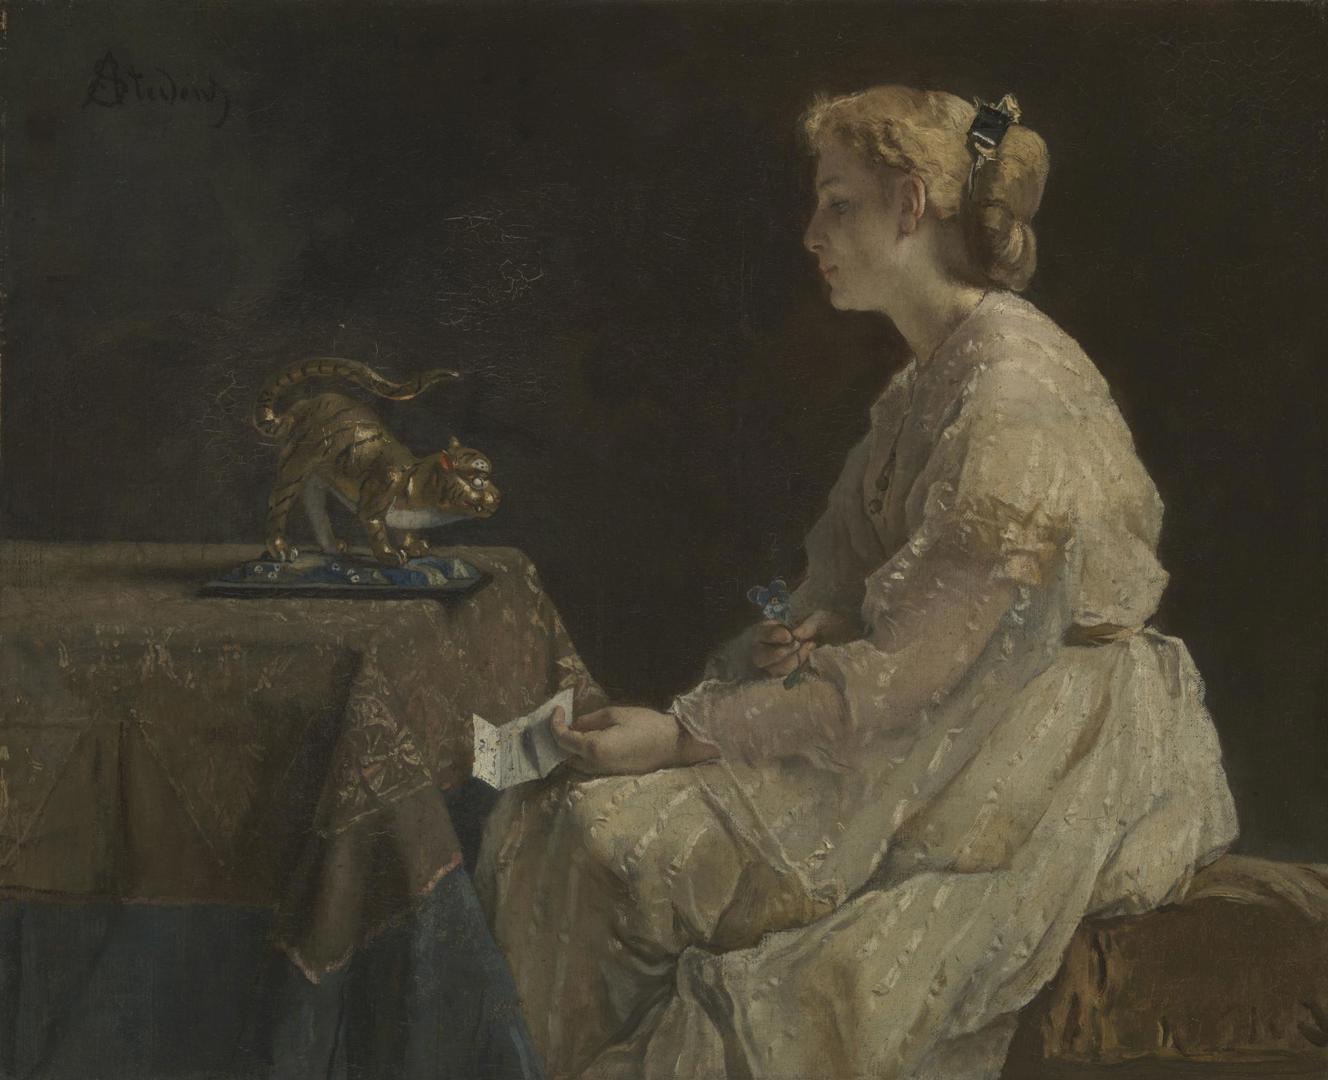 The Present by Alfred Stevens